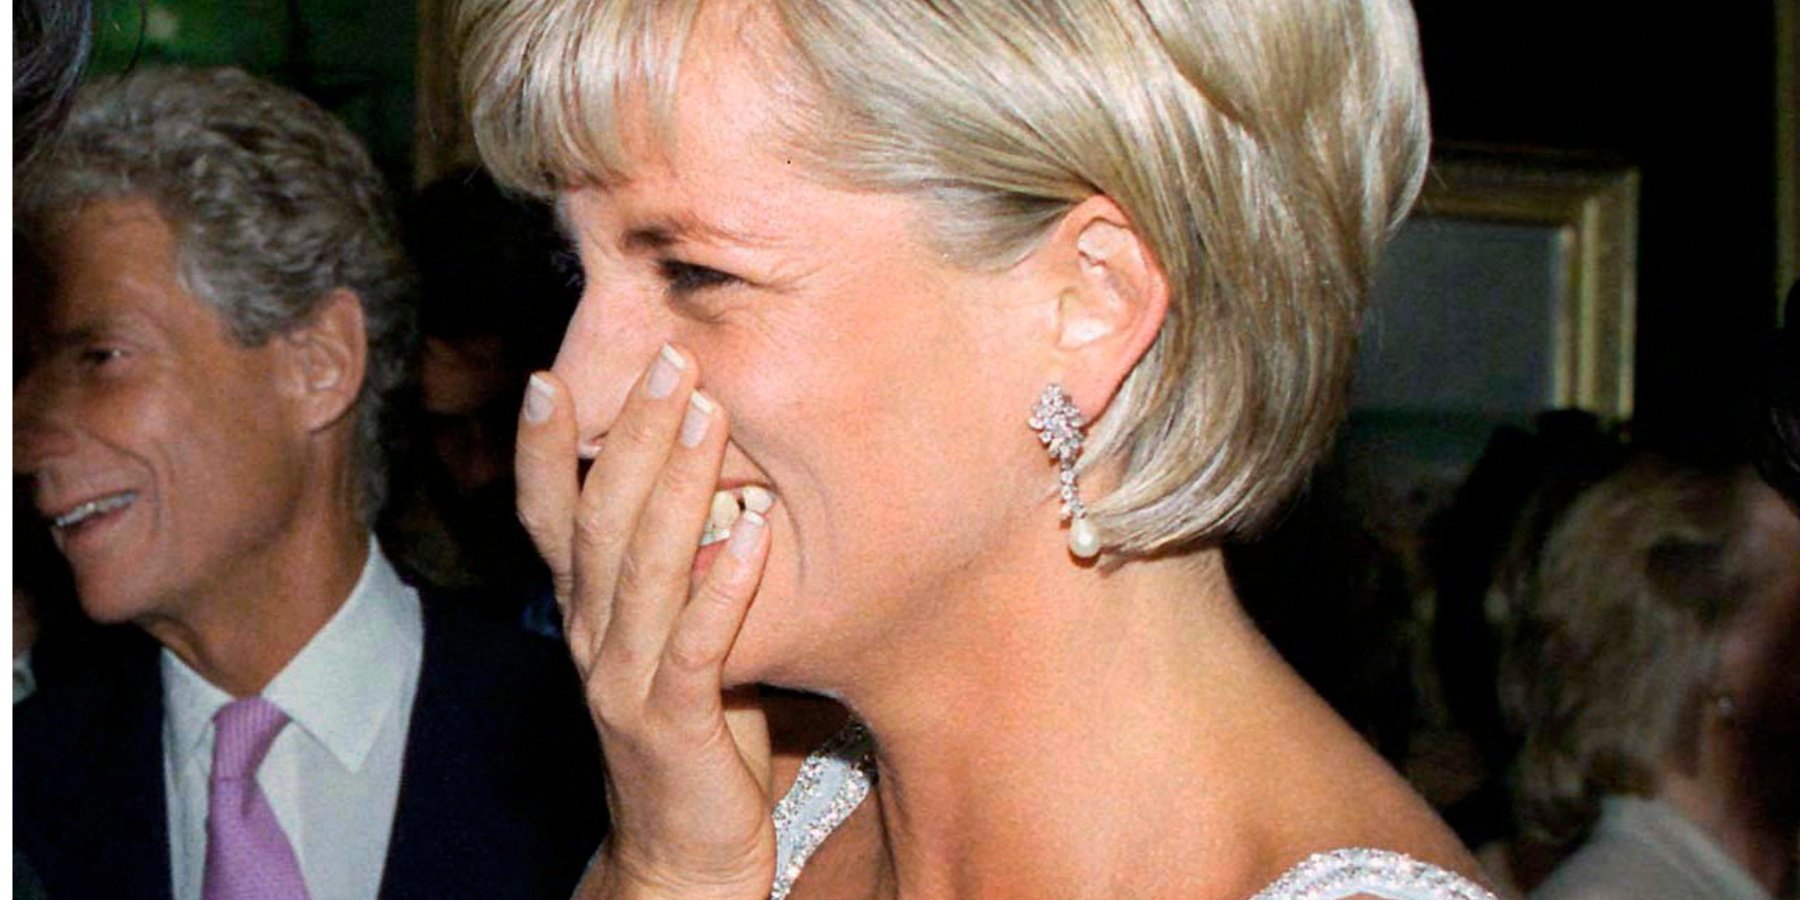 Princess Diana laughing in a photo snapped in the 1990s.